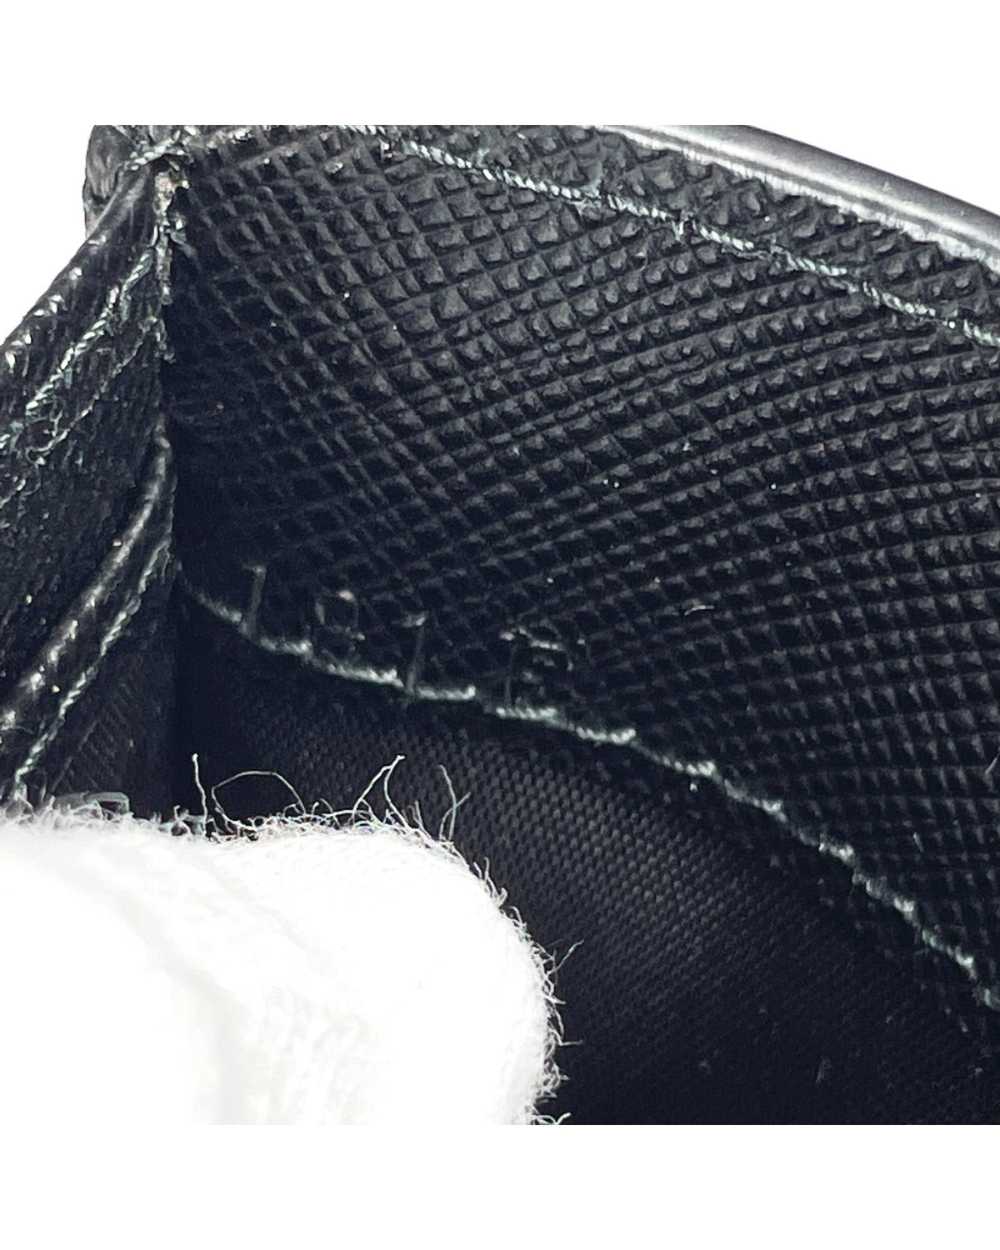 Prada Black Leather Trifold Wallet with Textured … - image 9